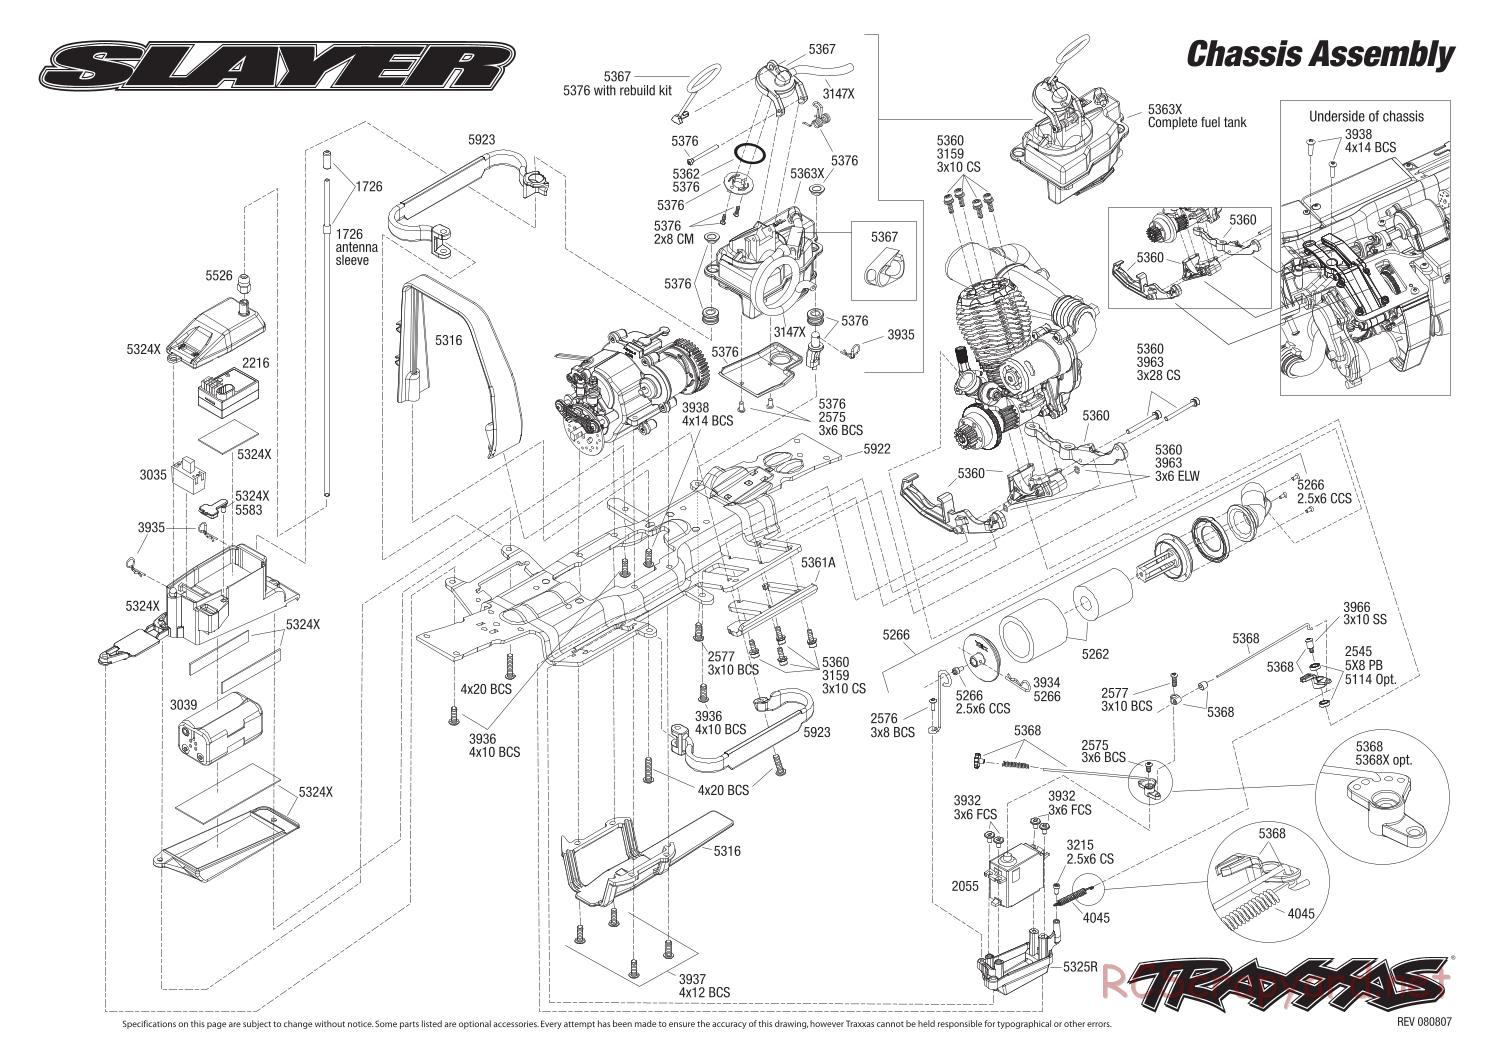 Traxxas - Slayer Pro 4WD (2008) - Exploded Views - Page 1